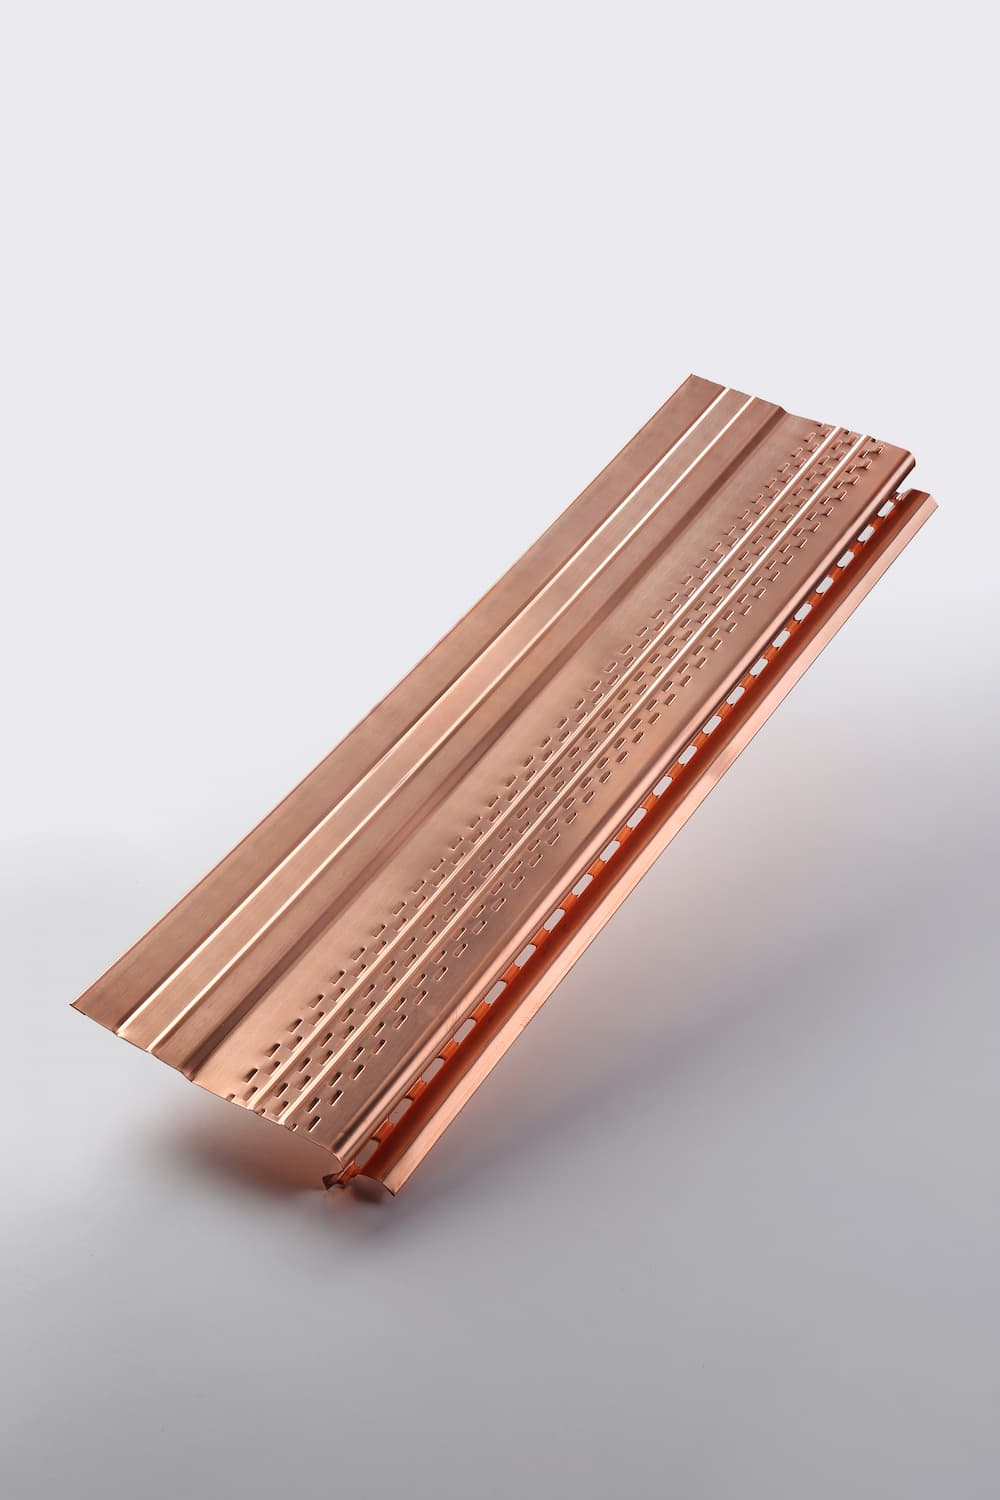 COPPER/GUTTER/GUARDS/GUARD/COVER/PROTECTION/HELMET/LEAF COVER/LEAFGUARDS/LEAFGURAD/LEAF PROTECTION/LEAF4GO/HALF ROUND GUARDS/